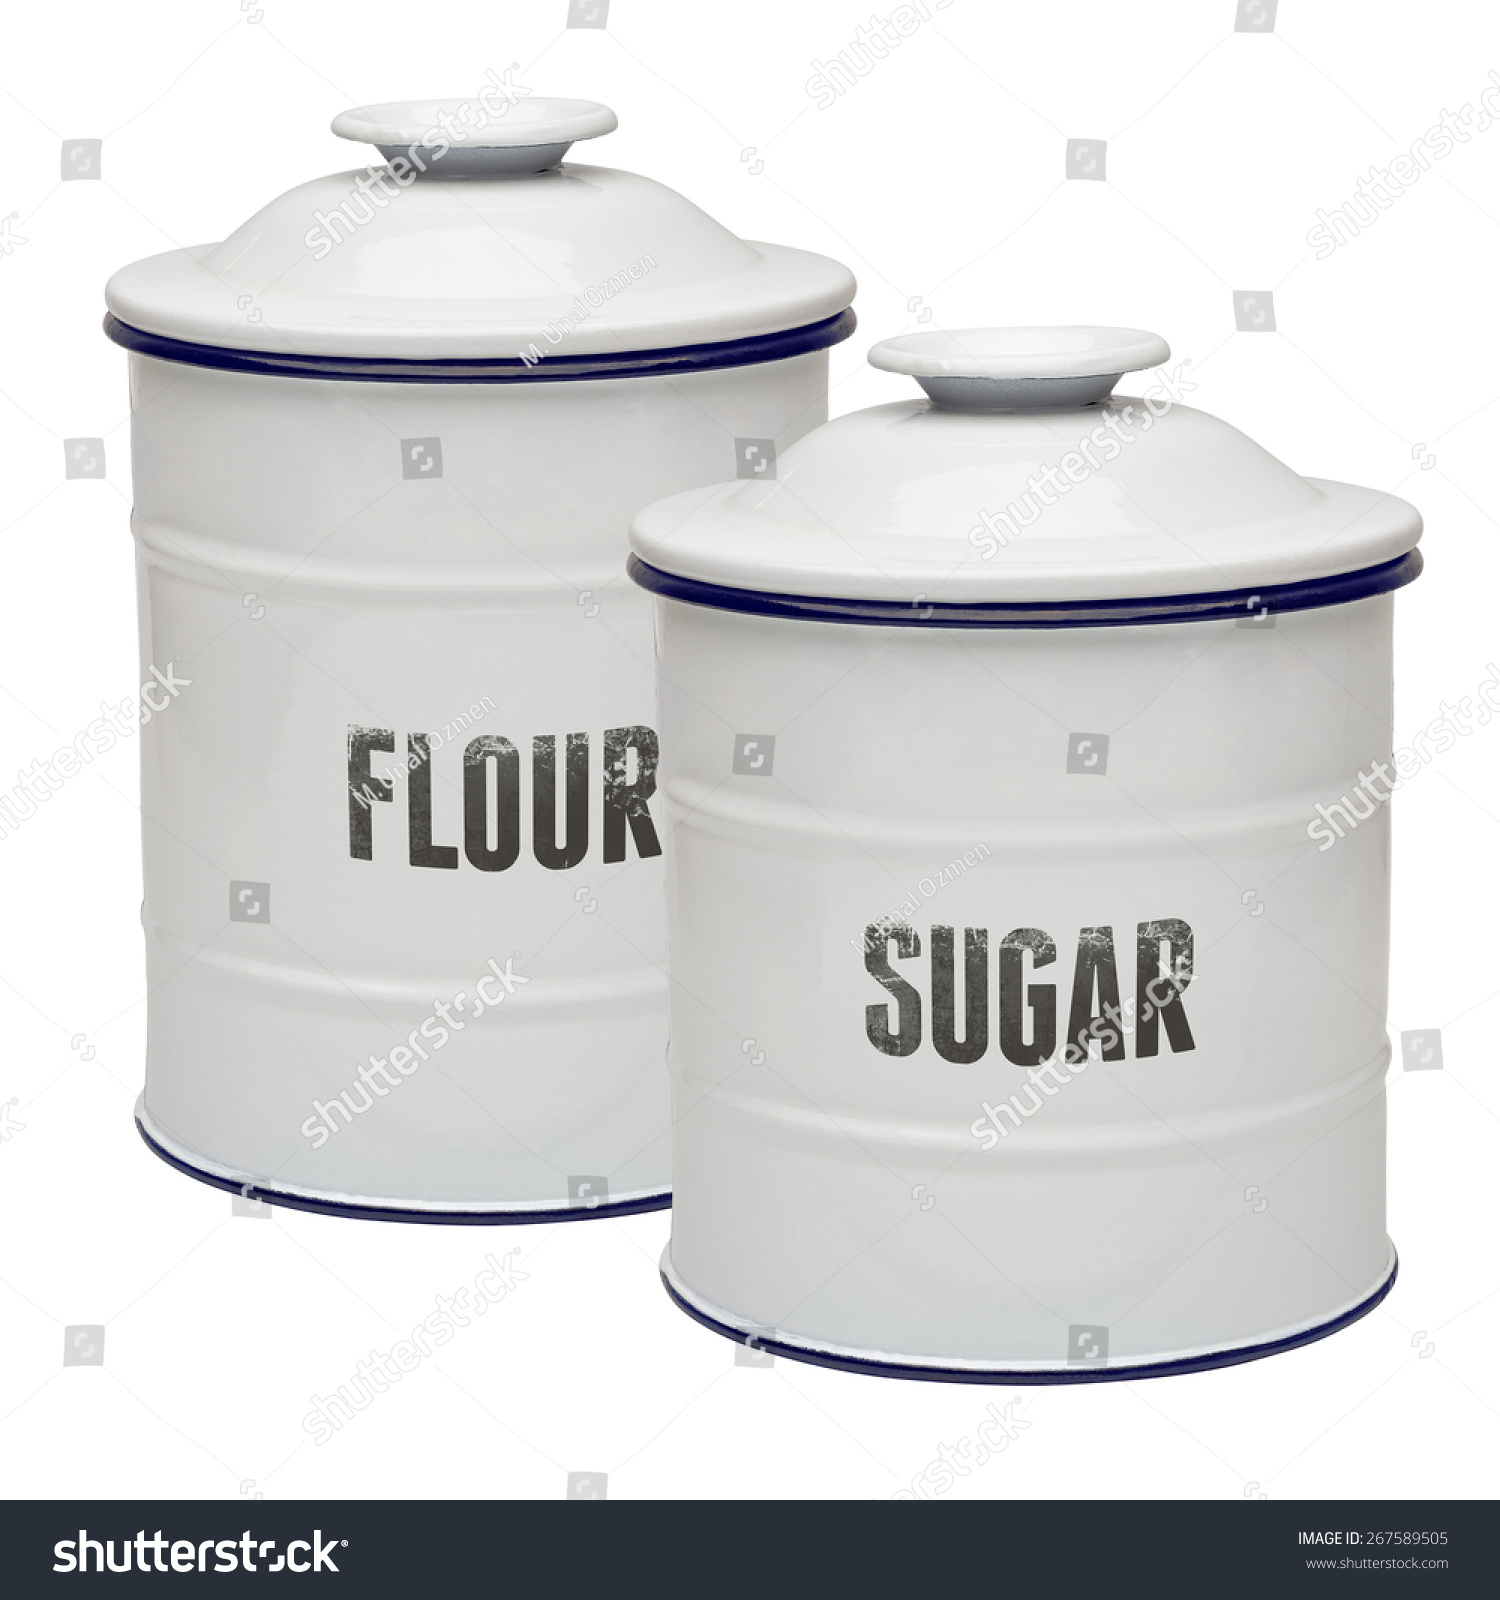 Stock Photo White Enamel Canisters In Flour And Sugar Isolated On White Background 267589505 